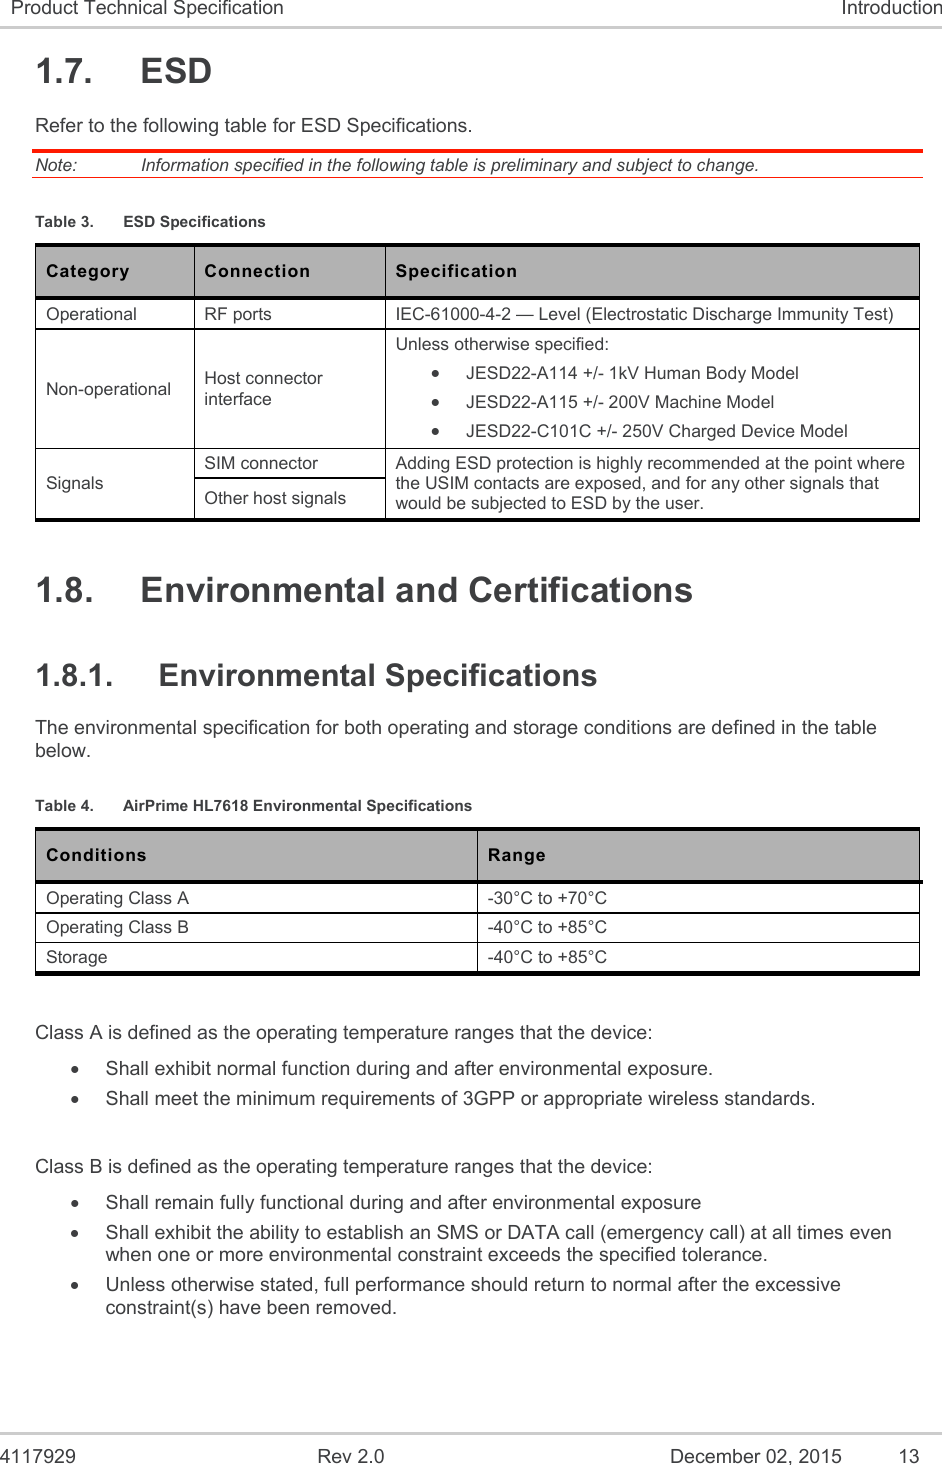  4117929  Rev 2.0  December 02, 2015  13 Product Technical Specification  Introduction 1.7.  ESD Refer to the following table for ESD Specifications. Note:   Information specified in the following table is preliminary and subject to change. Table 3.  ESD Specifications Category  Connection  Specification Operational  RF ports  IEC-61000-4-2 — Level (Electrostatic Discharge Immunity Test) Non-operational  Host connector interface Unless otherwise specified:  JESD22-A114 +/- 1kV Human Body Model  JESD22-A115 +/- 200V Machine Model  JESD22-C101C +/- 250V Charged Device Model Signals SIM connector  Adding ESD protection is highly recommended at the point where the USIM contacts are exposed, and for any other signals that would be subjected to ESD by the user. Other host signals 1.8.  Environmental and Certifications 1.8.1.  Environmental Specifications The environmental specification for both operating and storage conditions are defined in the table below. Table 4.  AirPrime HL7618 Environmental Specifications Conditions  Range Operating Class A  -30°C to +70°C Operating Class B  -40°C to +85°C Storage  -40°C to +85°C  Class A is defined as the operating temperature ranges that the device:    Shall exhibit normal function during and after environmental exposure.    Shall meet the minimum requirements of 3GPP or appropriate wireless standards.   Class B is defined as the operating temperature ranges that the device:     Shall remain fully functional during and after environmental exposure    Shall exhibit the ability to establish an SMS or DATA call (emergency call) at all times even when one or more environmental constraint exceeds the specified tolerance.    Unless otherwise stated, full performance should return to normal after the excessive constraint(s) have been removed.   